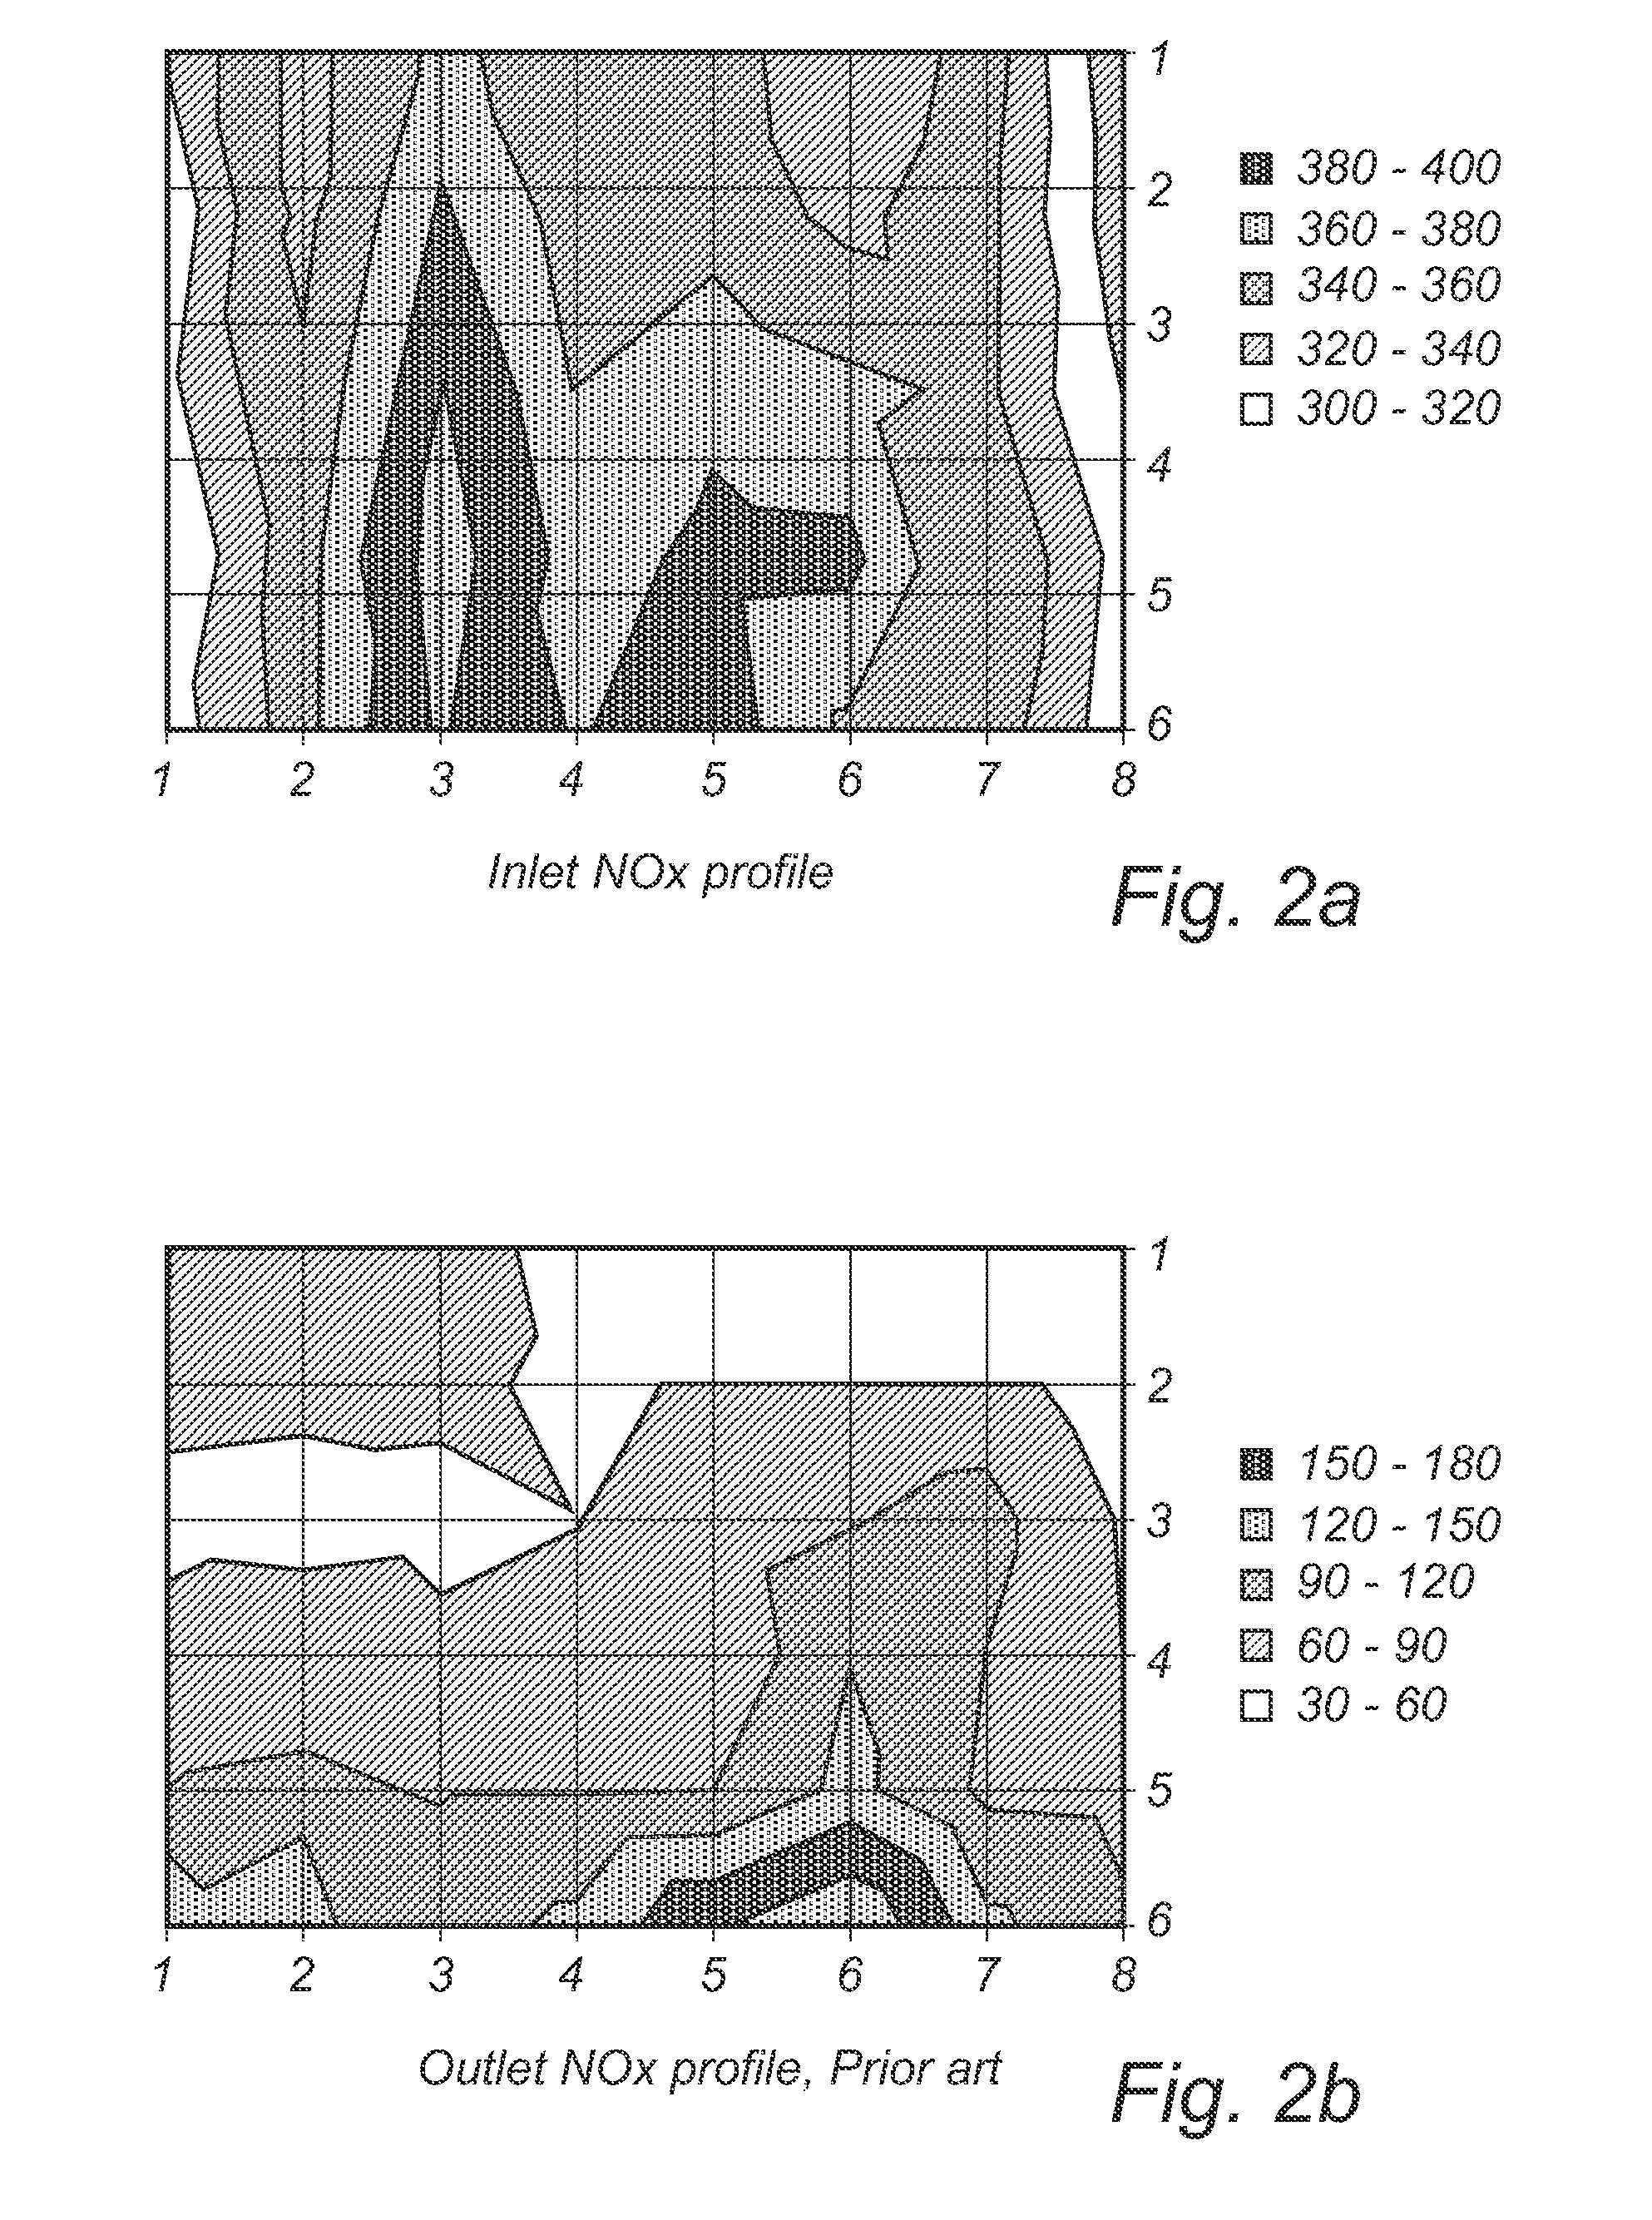 Method and device for controlling the supply of a reducing agent to an scr system